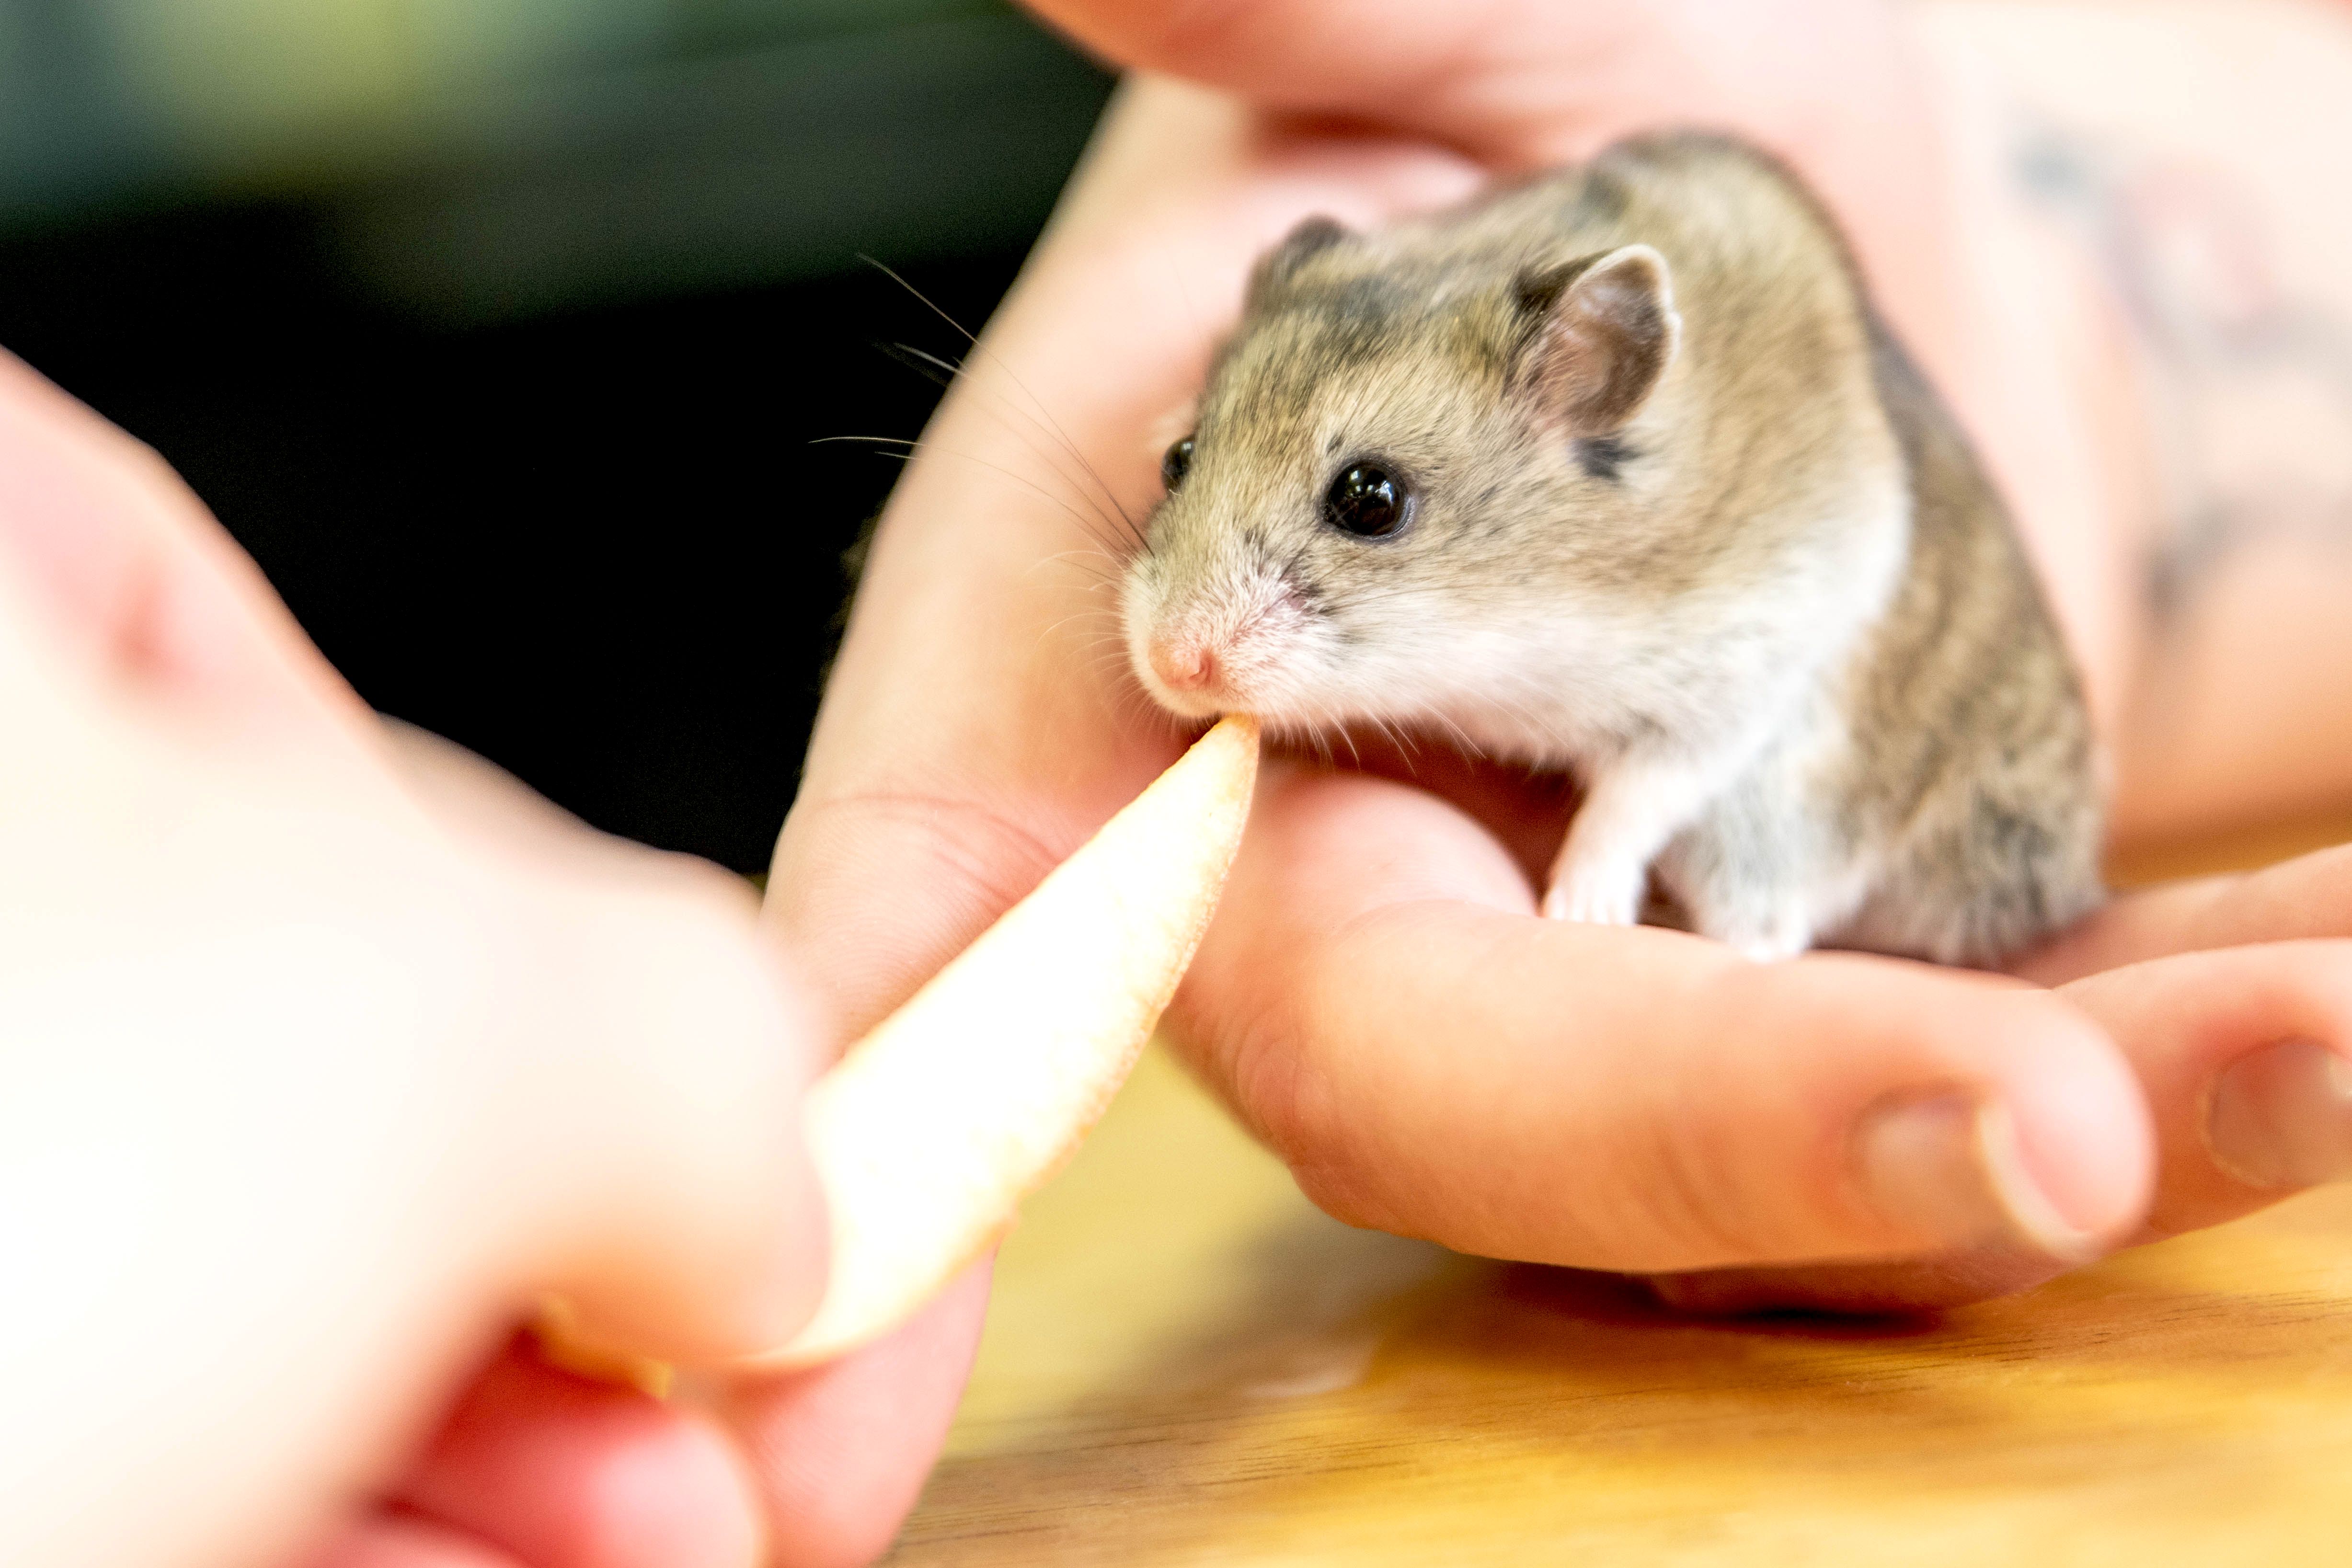 what can dwarf hamsters eat